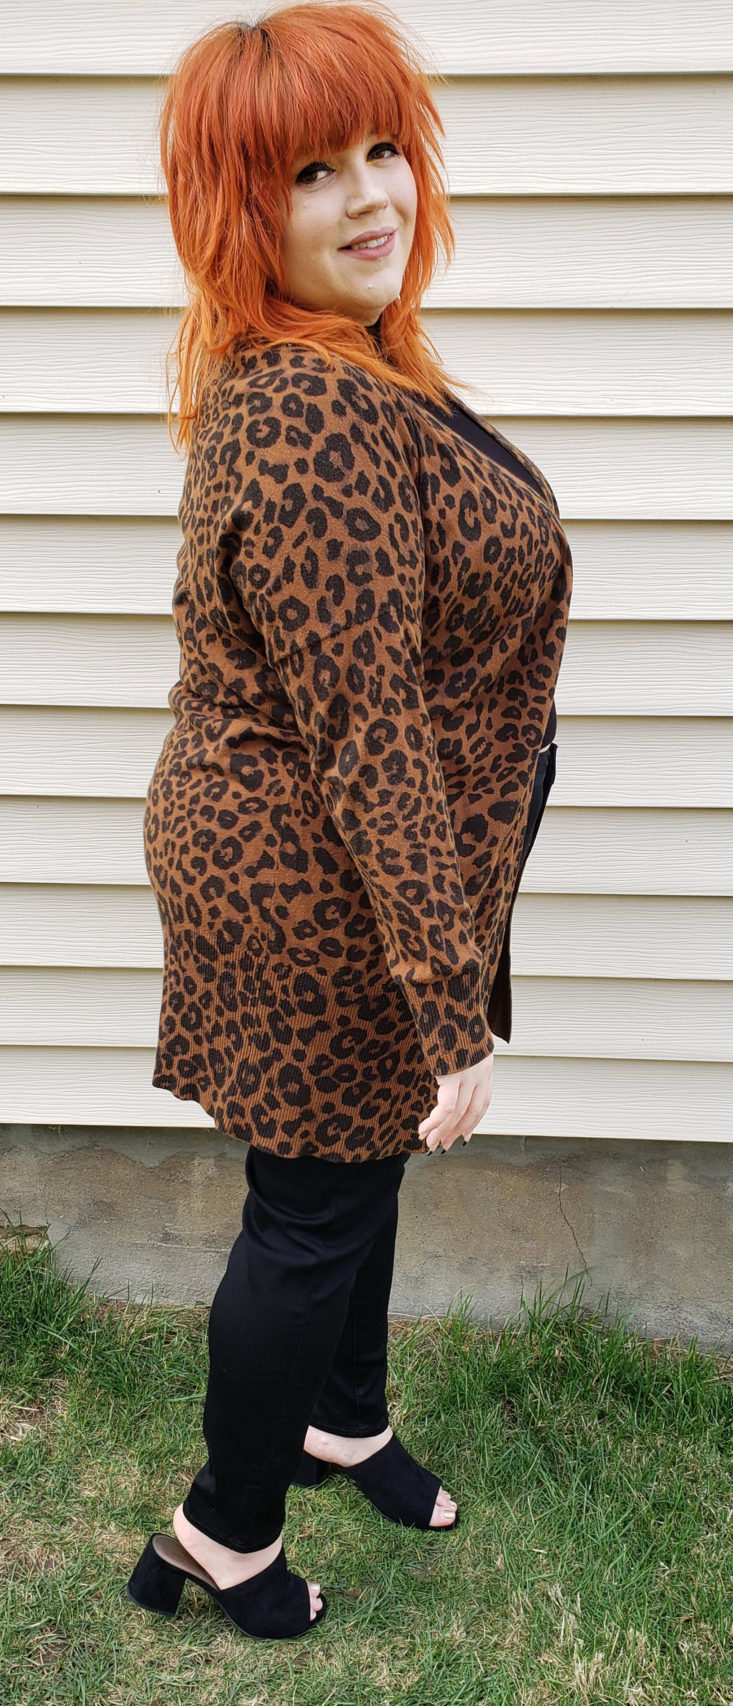 Gwynnie Bee Box Review March 2019 - Leopard Print Lenox Cardigan by Sanctuary Clothing Pose 4 Side